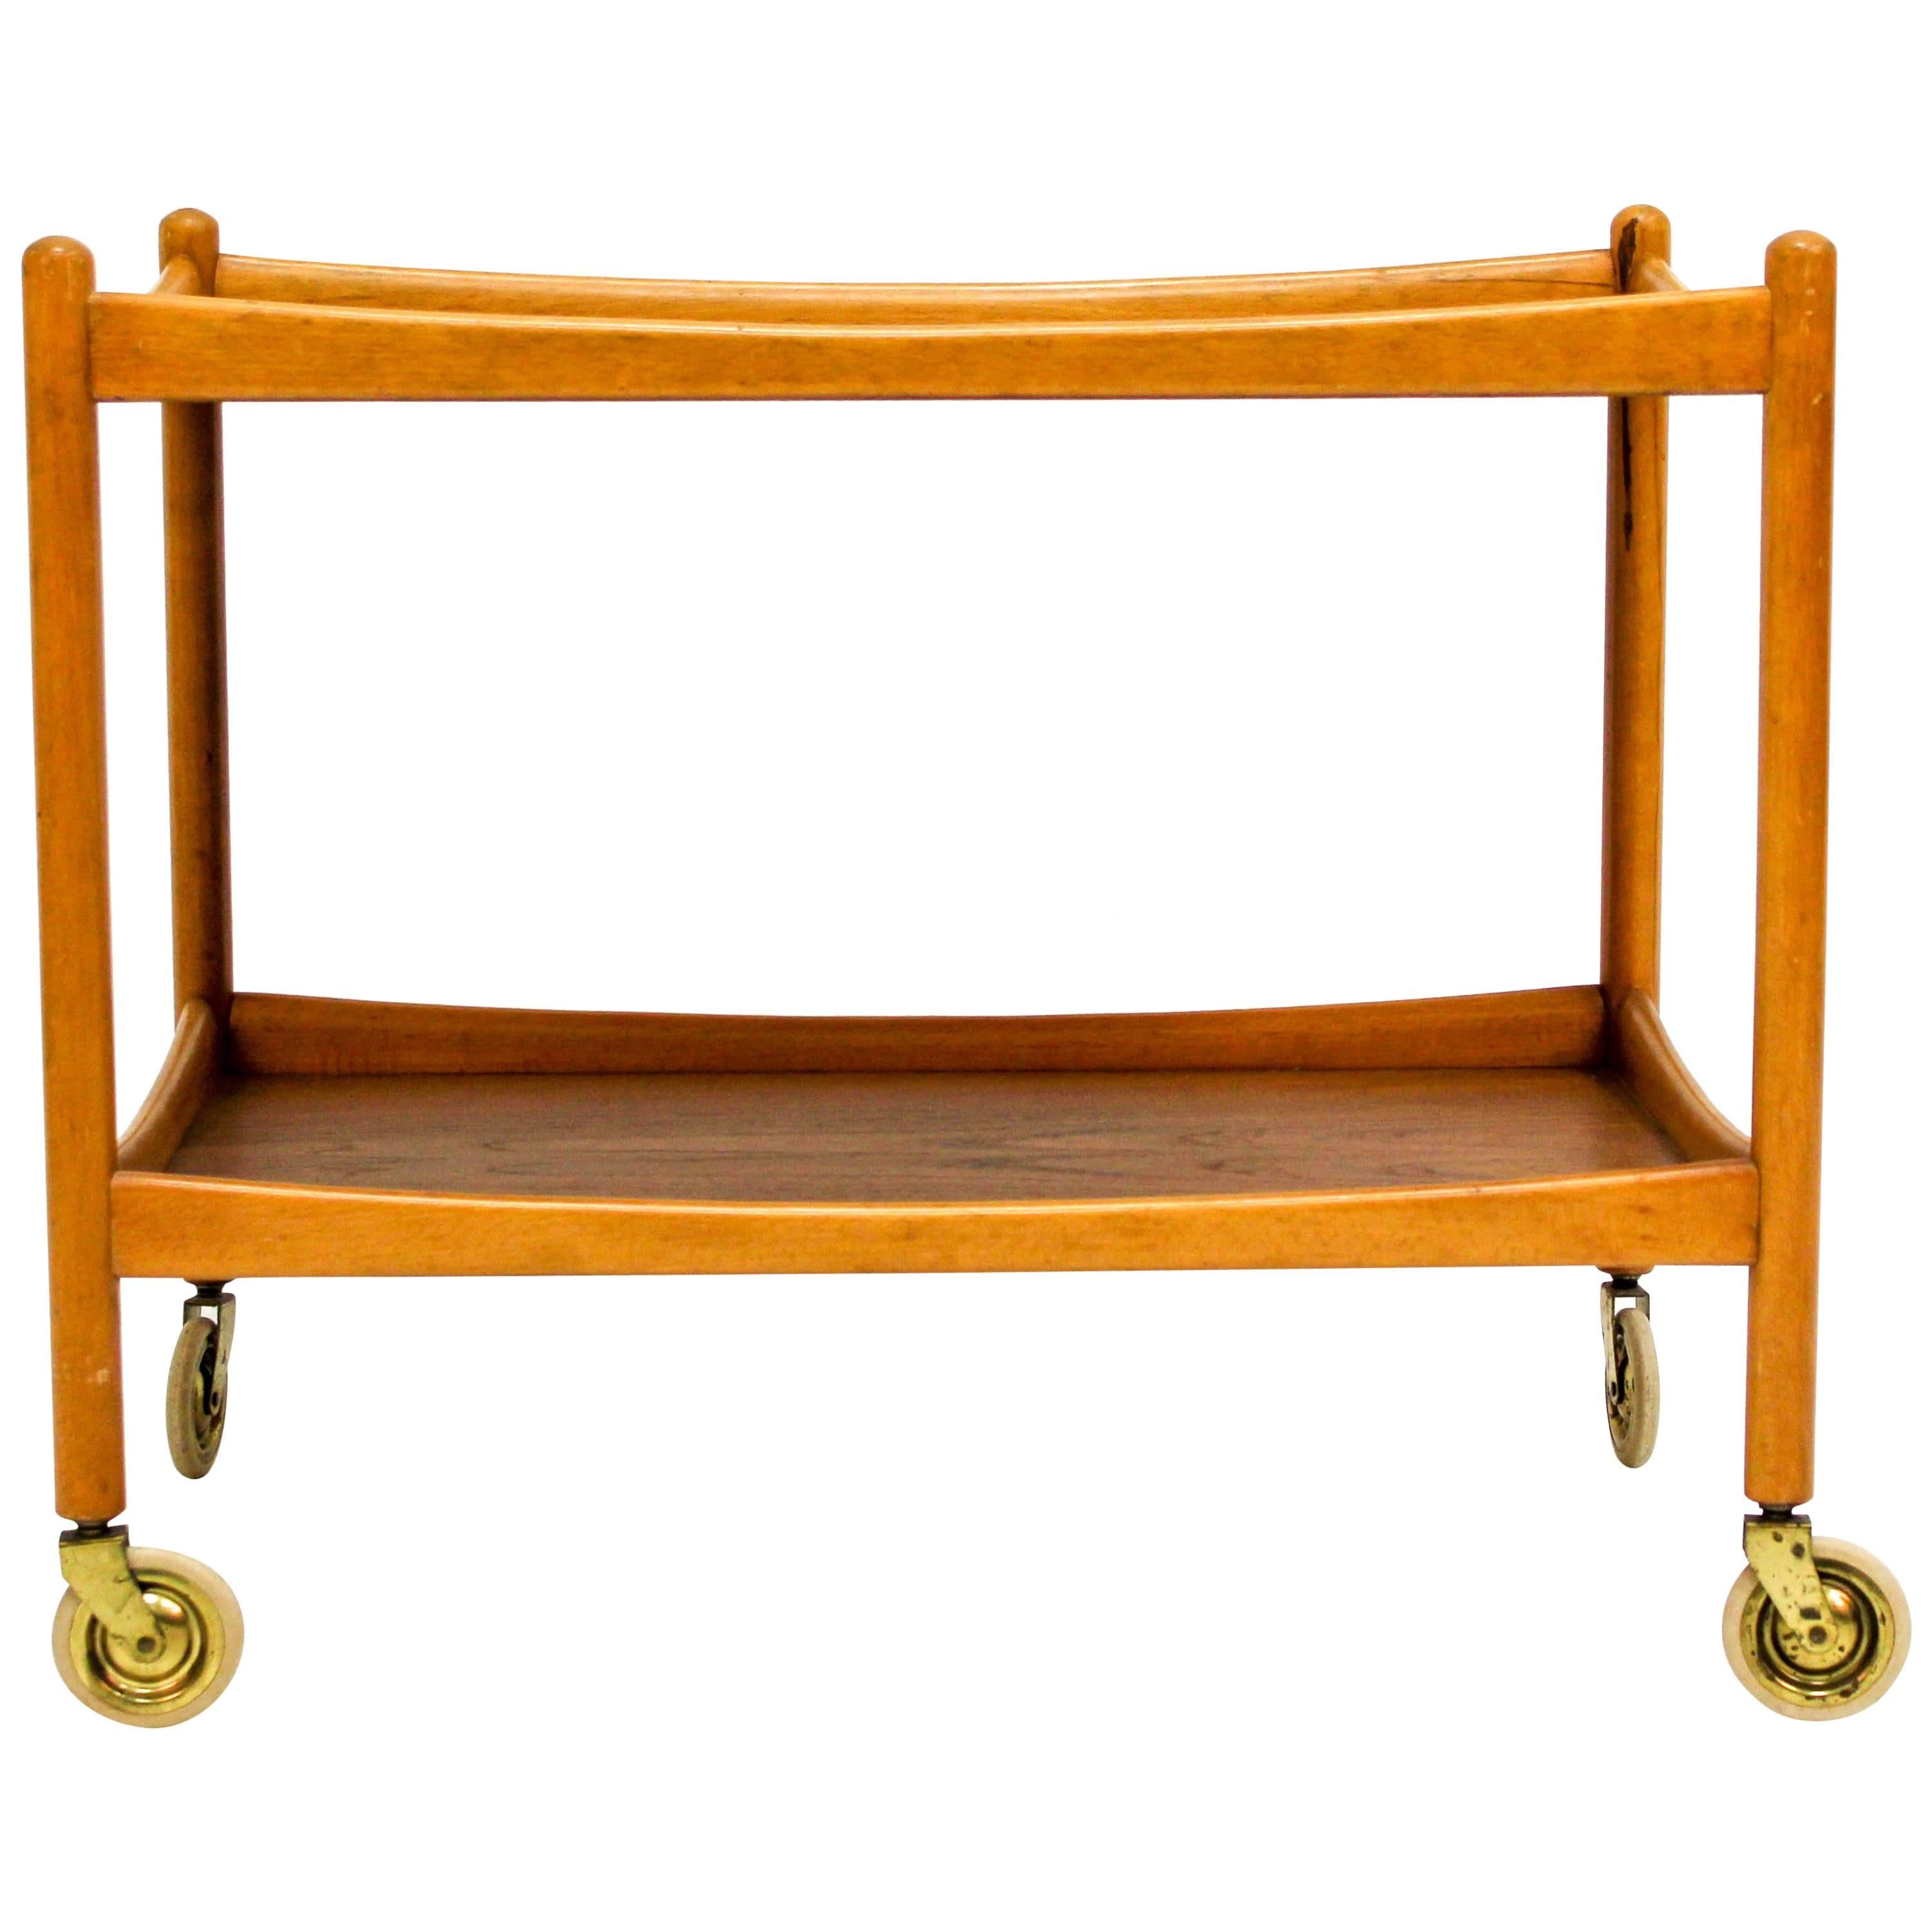 Midcentury Poul Volther Serving Cart for Gemla